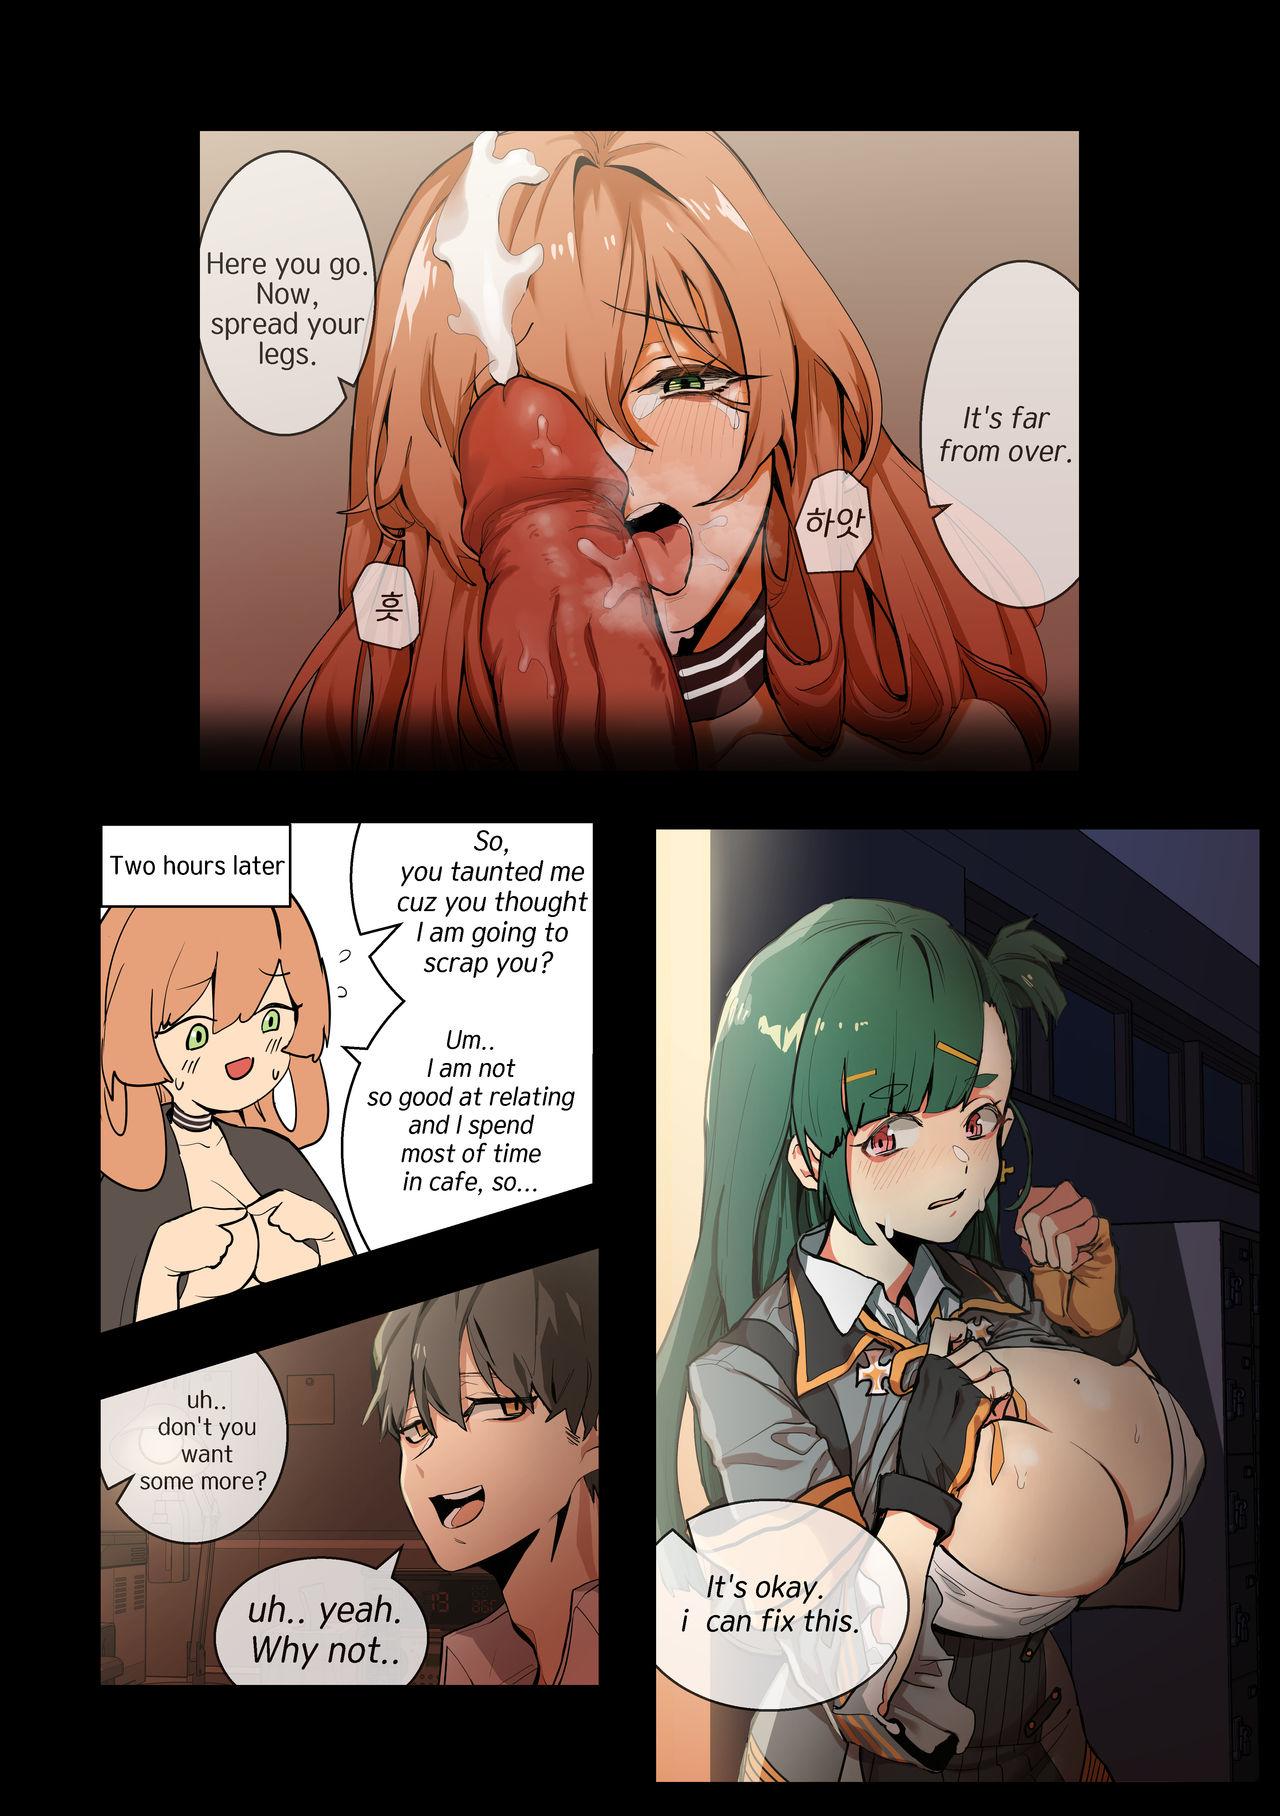 Trimmed Trick - Girls frontline Tattoos - Page 20